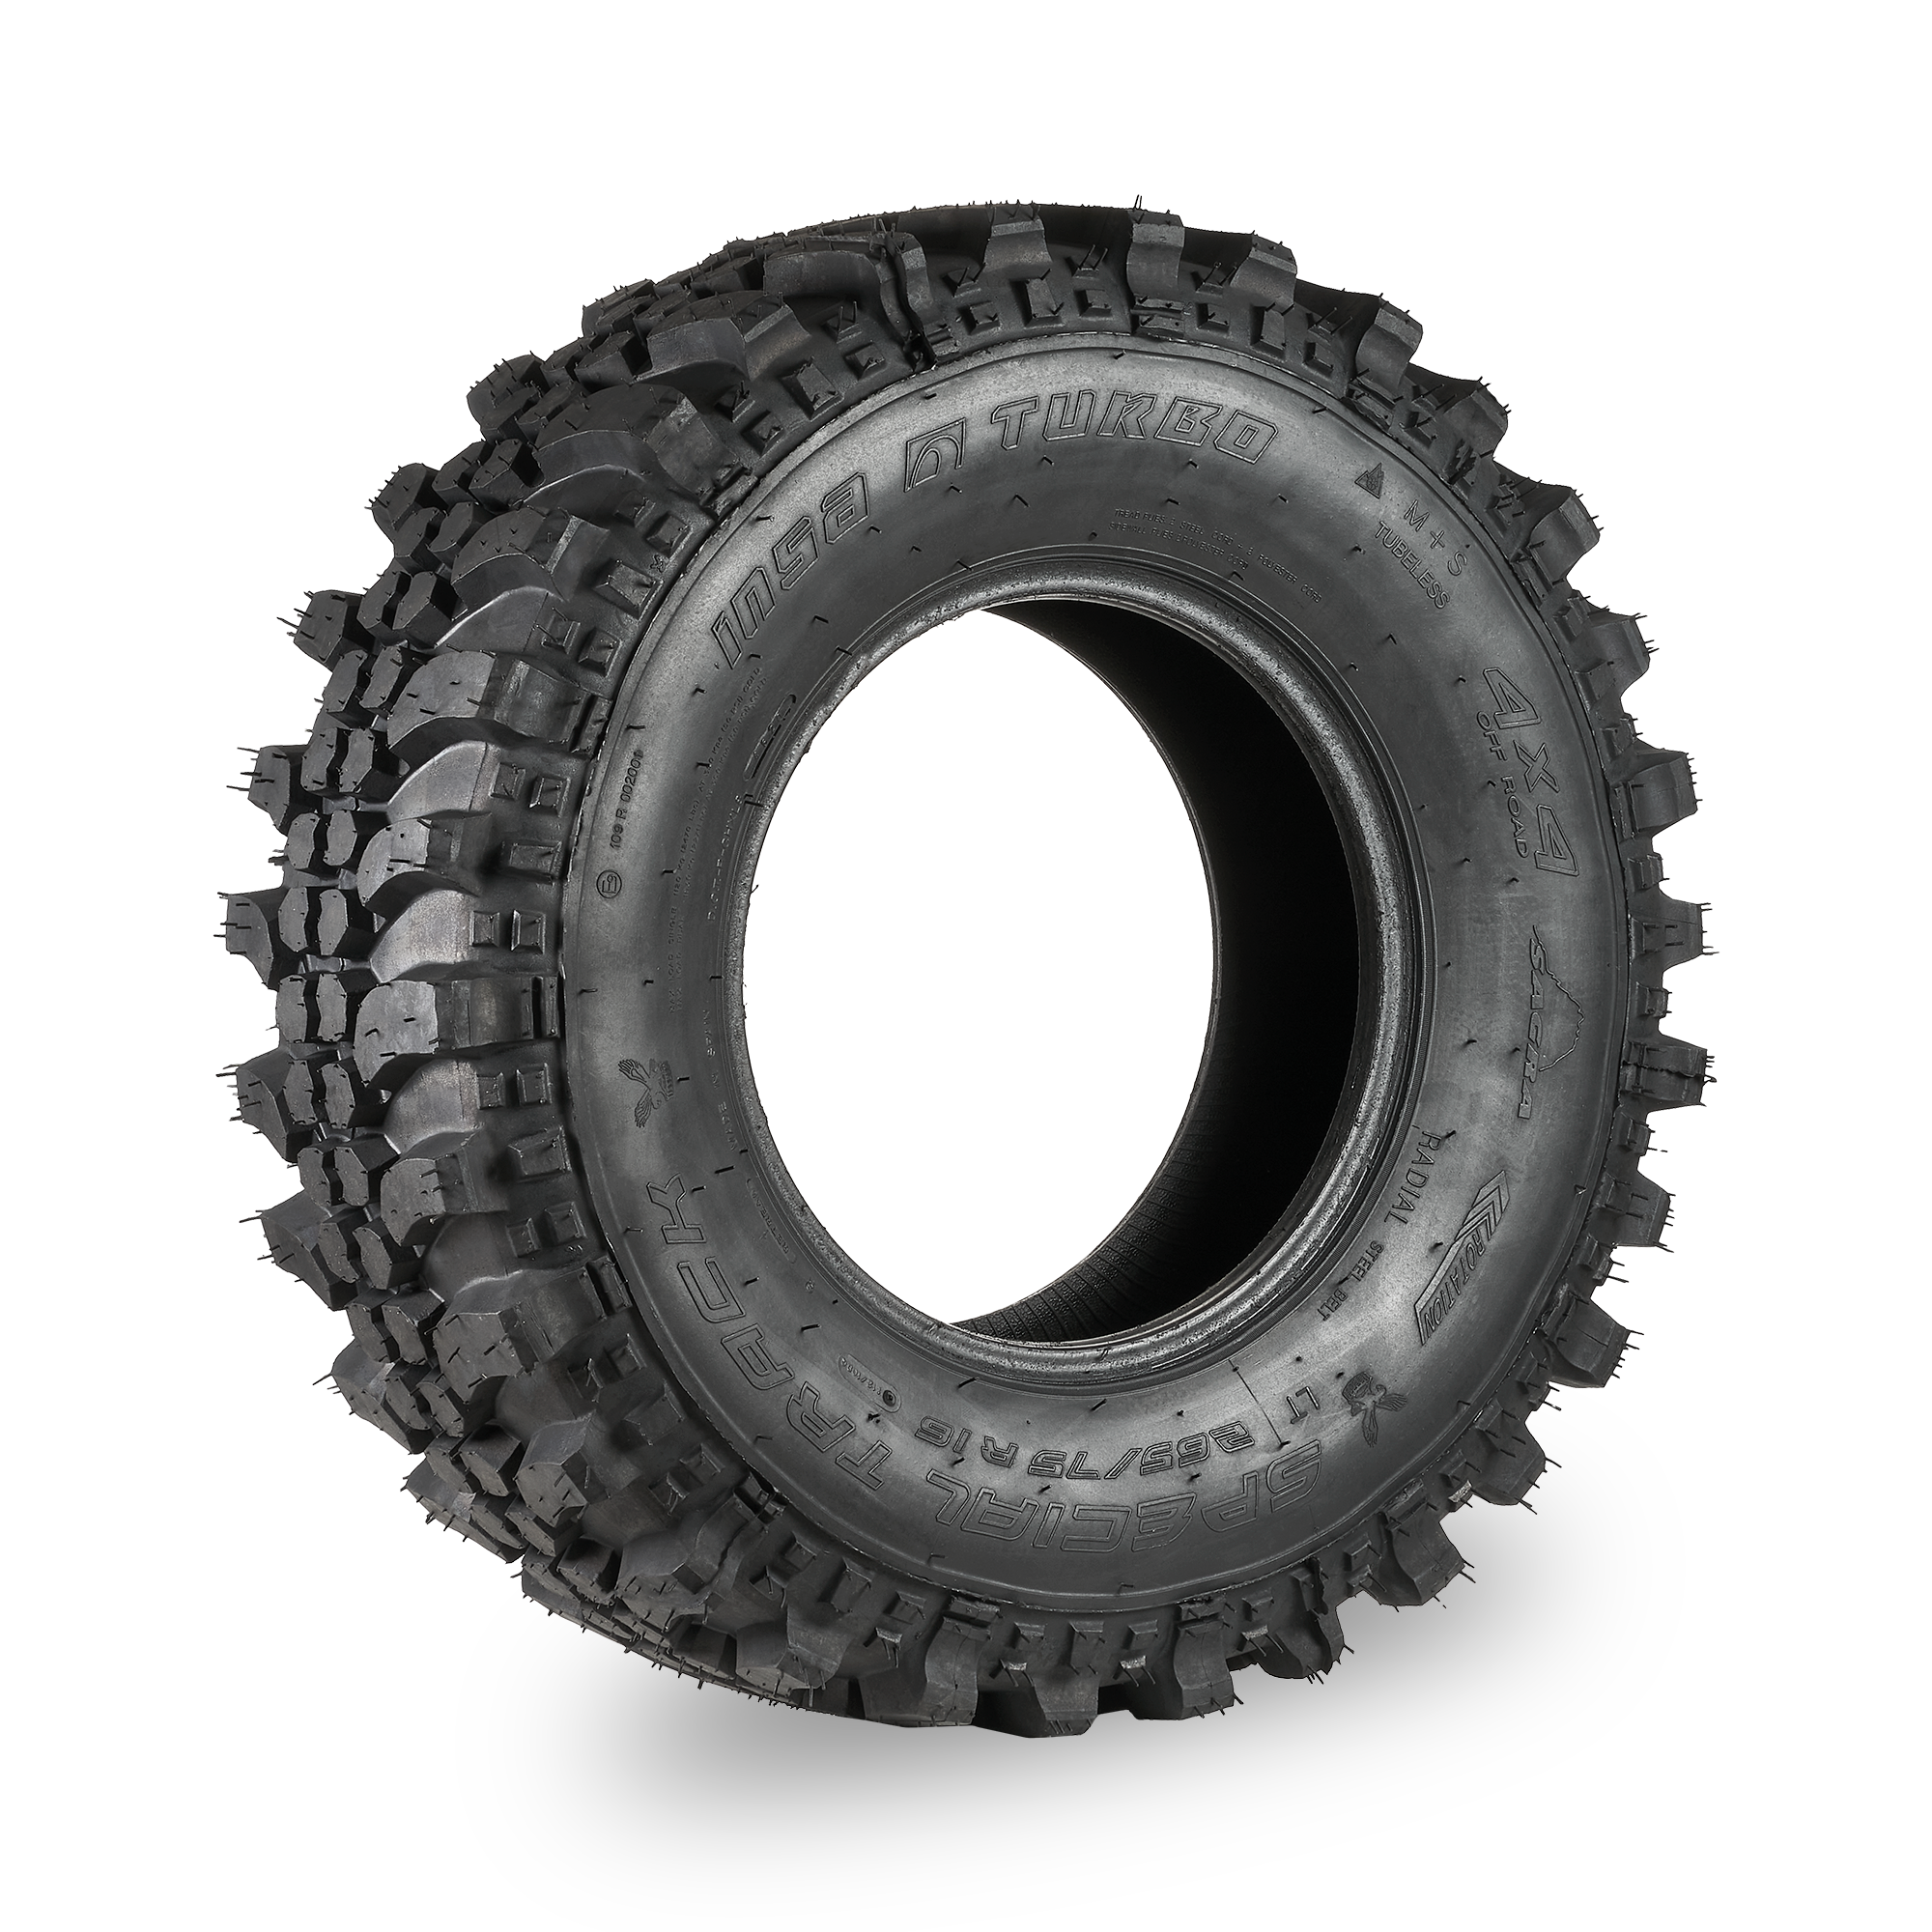 a picture of the product Insa Turbo tyres Special Track Mud "nsa Turbo special track